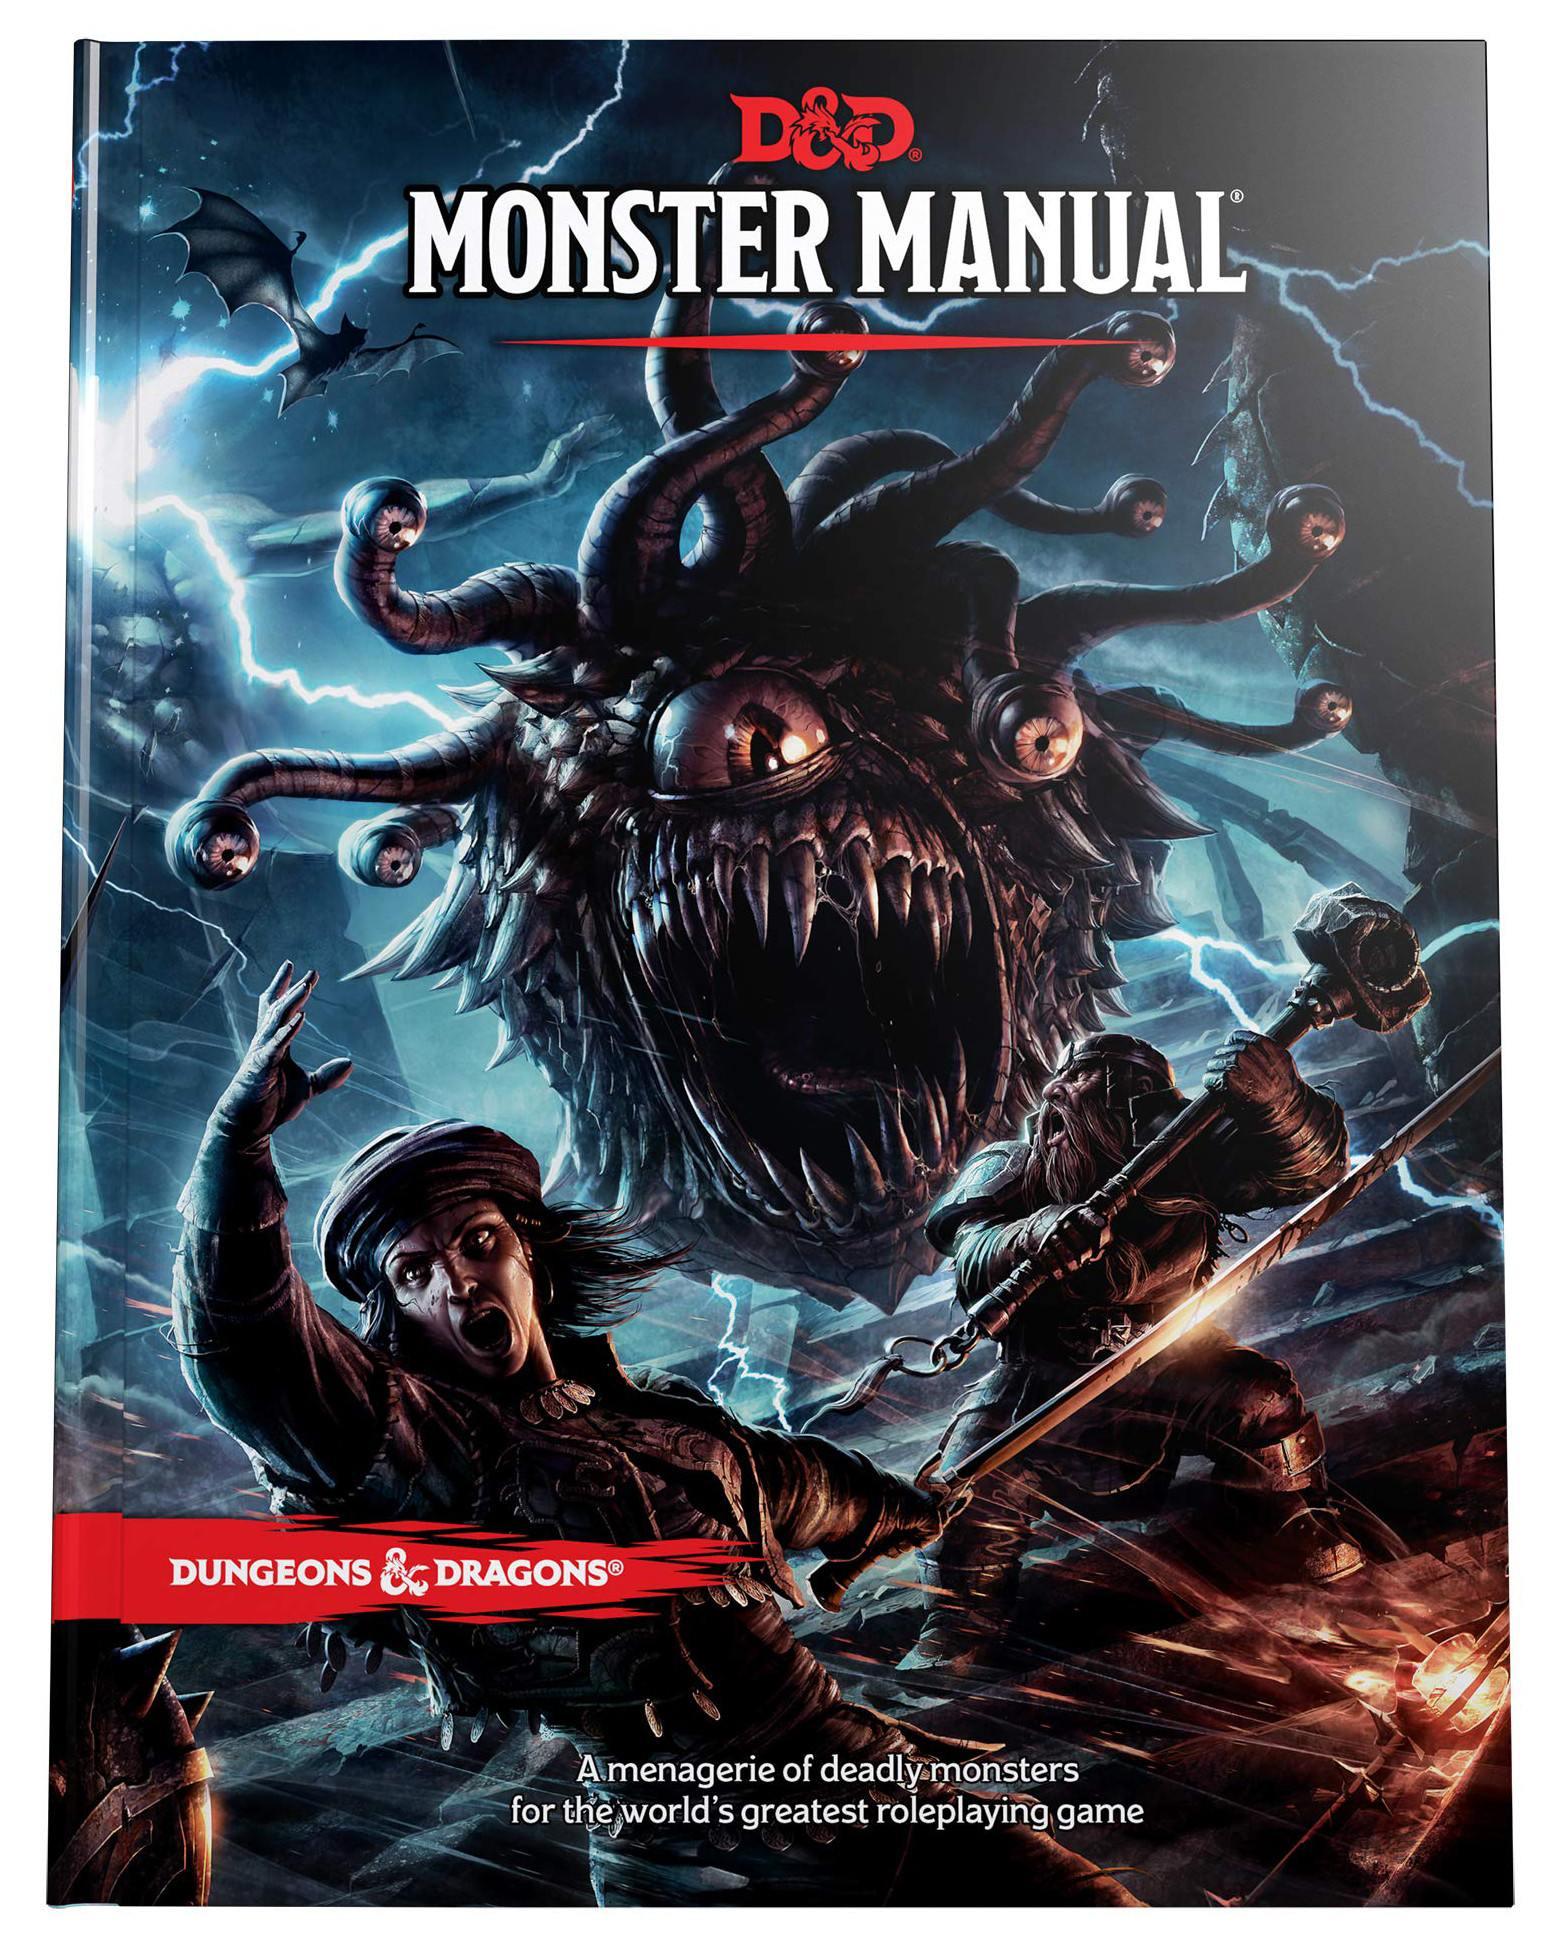 VR-87467 D&D Dungeons & Dragons Monster Manual Hardcover - Wizards of the Coast - Titan Pop Culture